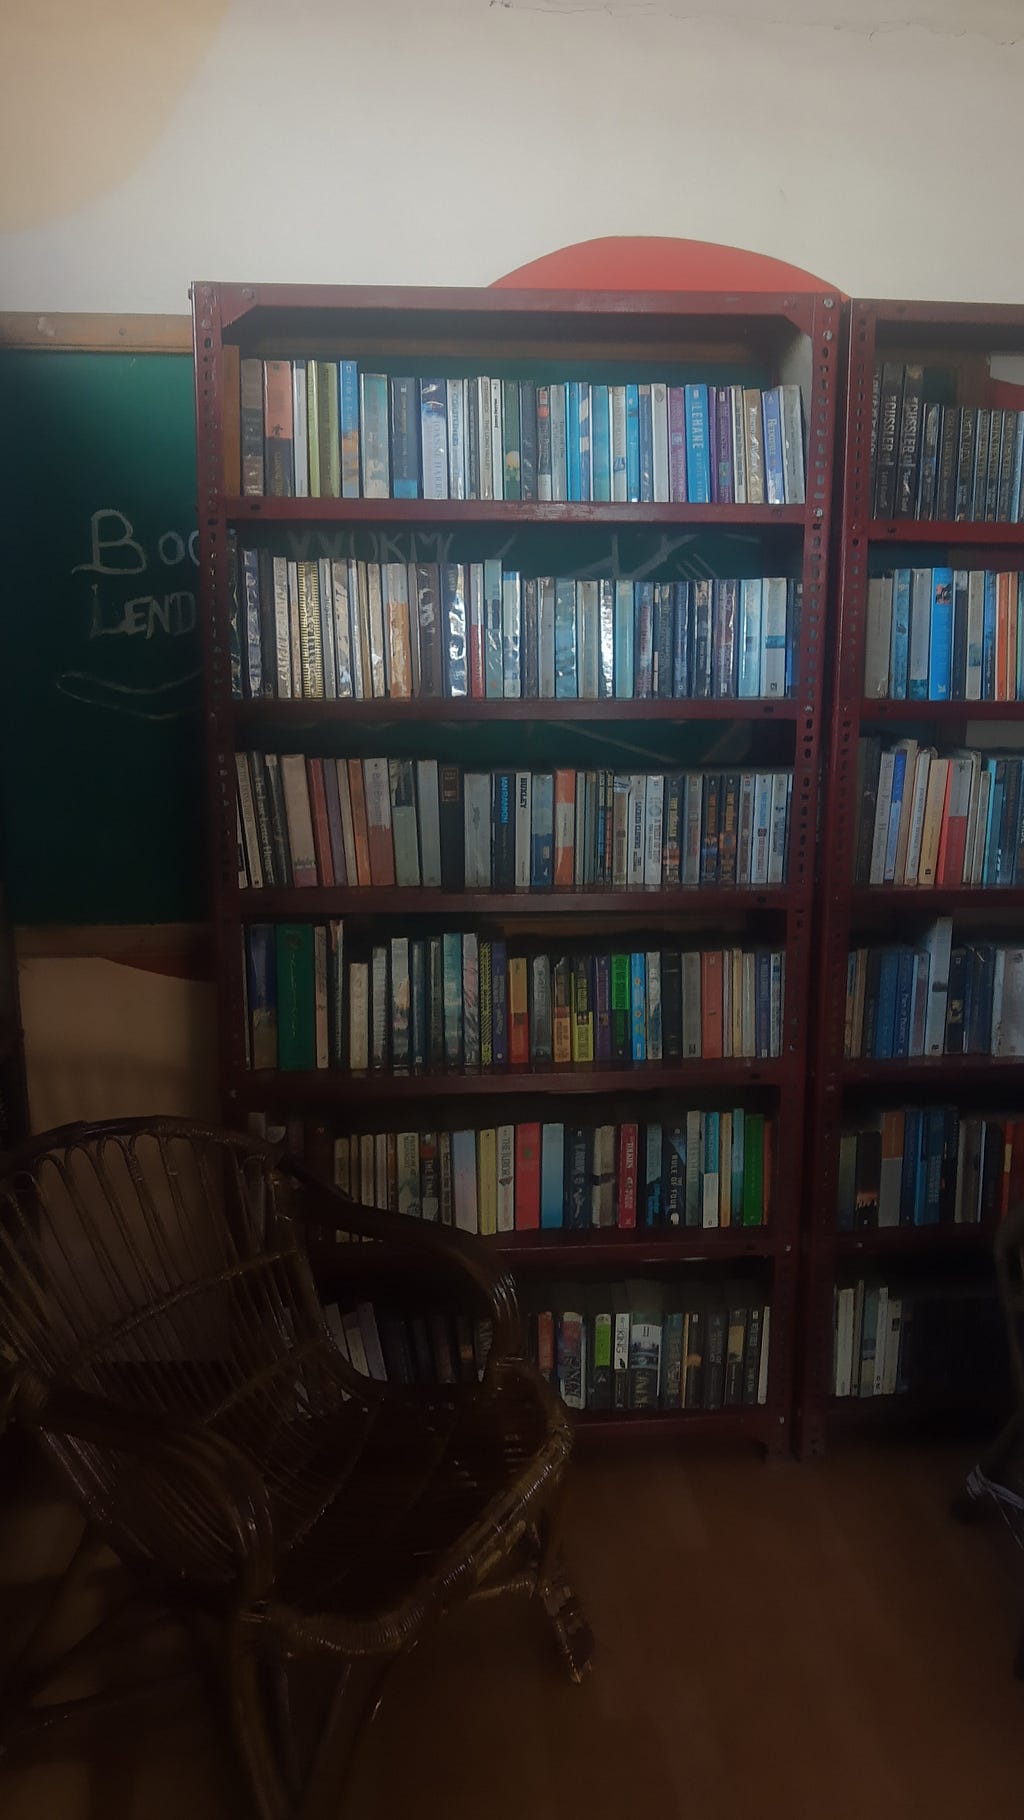 Tall shelves filled with books next to an empty wicker chair. The bookshelf is filled with various books and the chair positioned in front of it to the left.